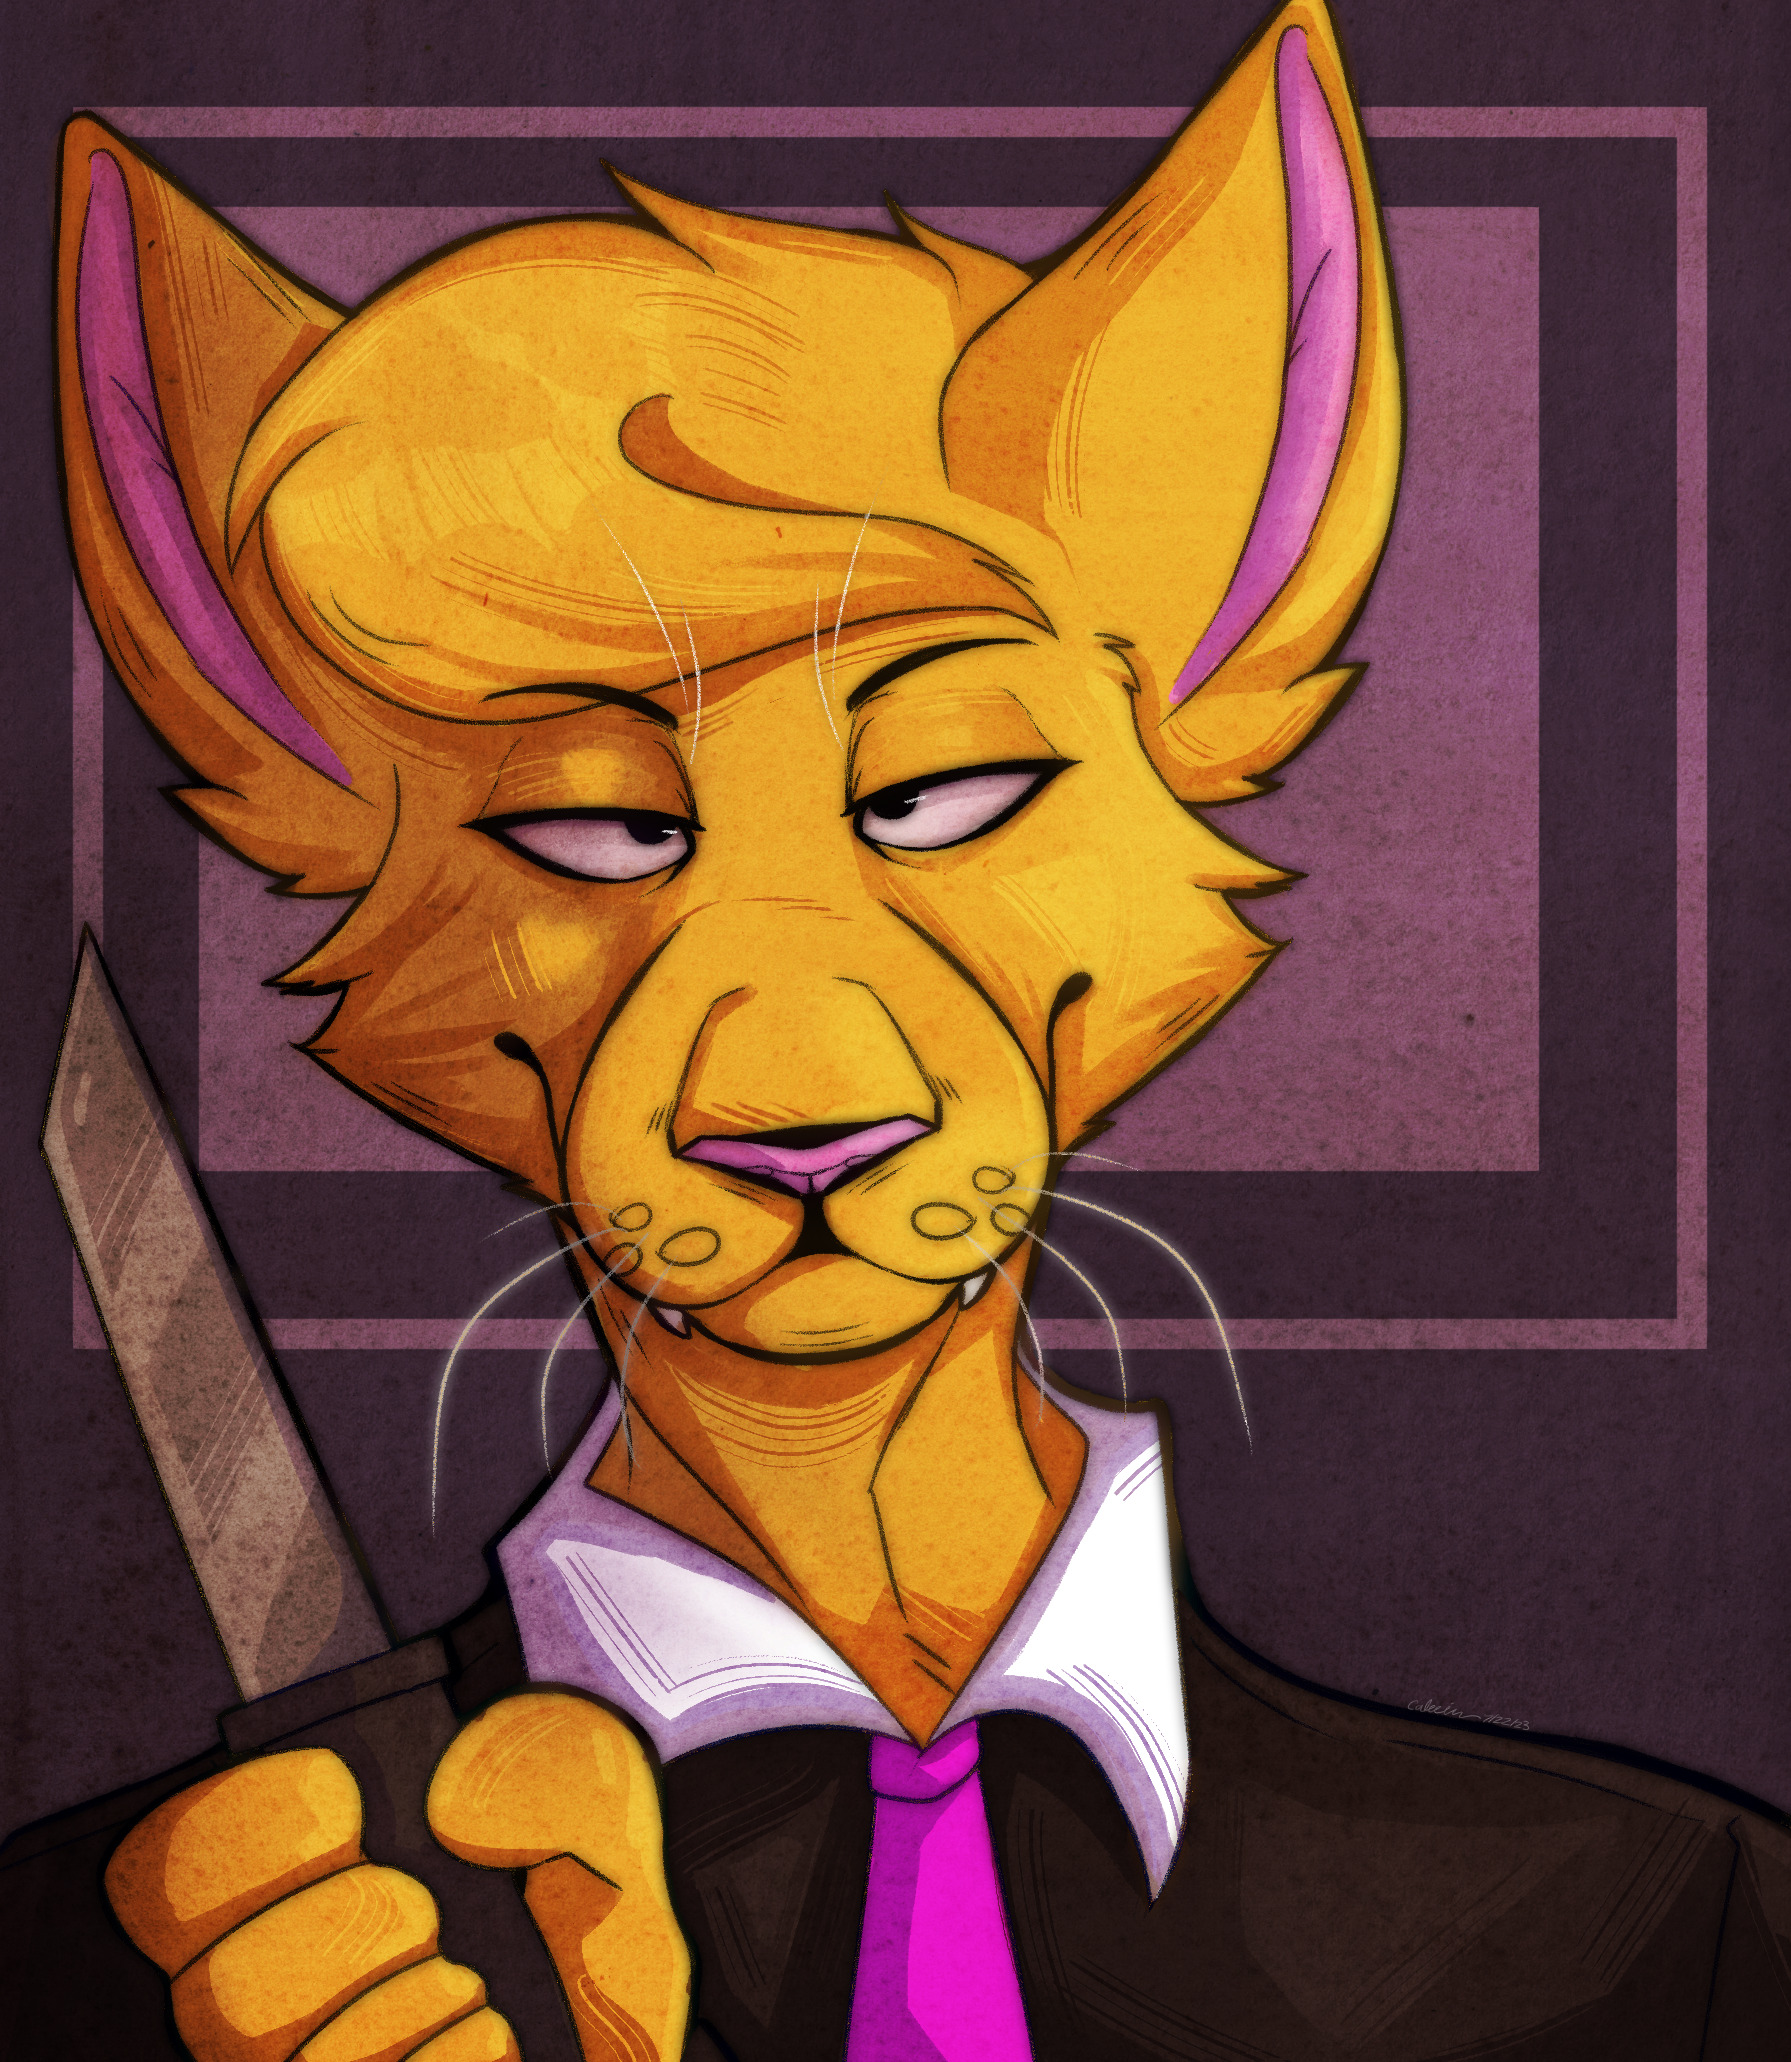 A drawing of an yellow cat in a tuxedo with a pink tie holding up a knife and facing foward